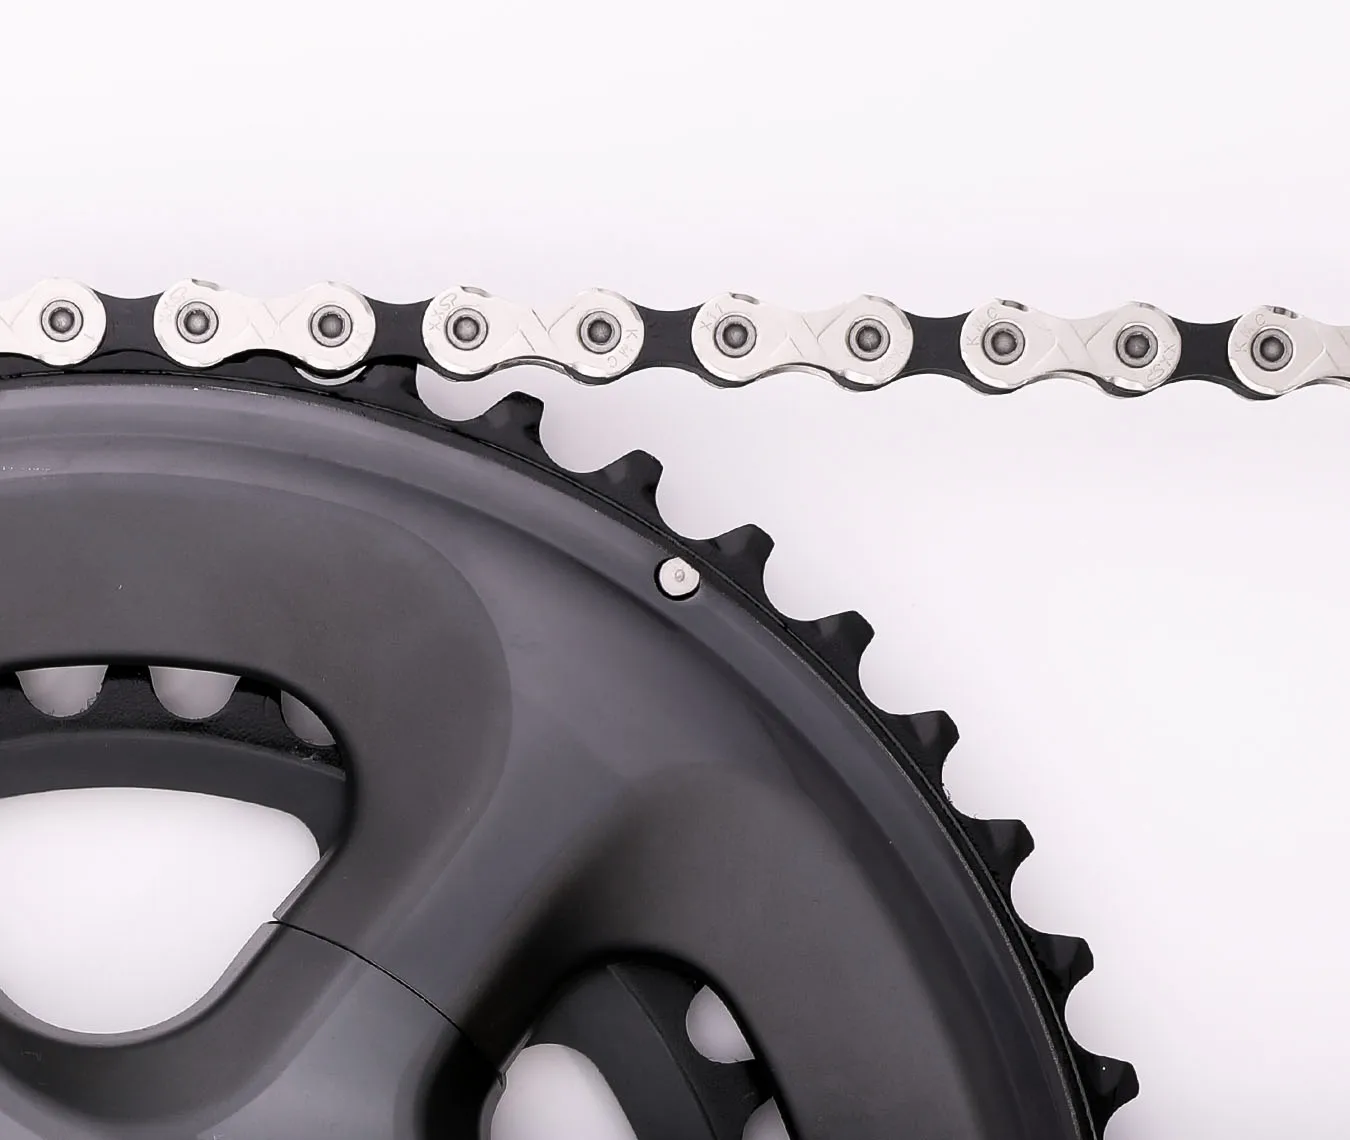 Z Bridge Outer Plate Z9 Kmc 9 Speed Gray Road Bike Chain Suitable For City Touring And Trekking